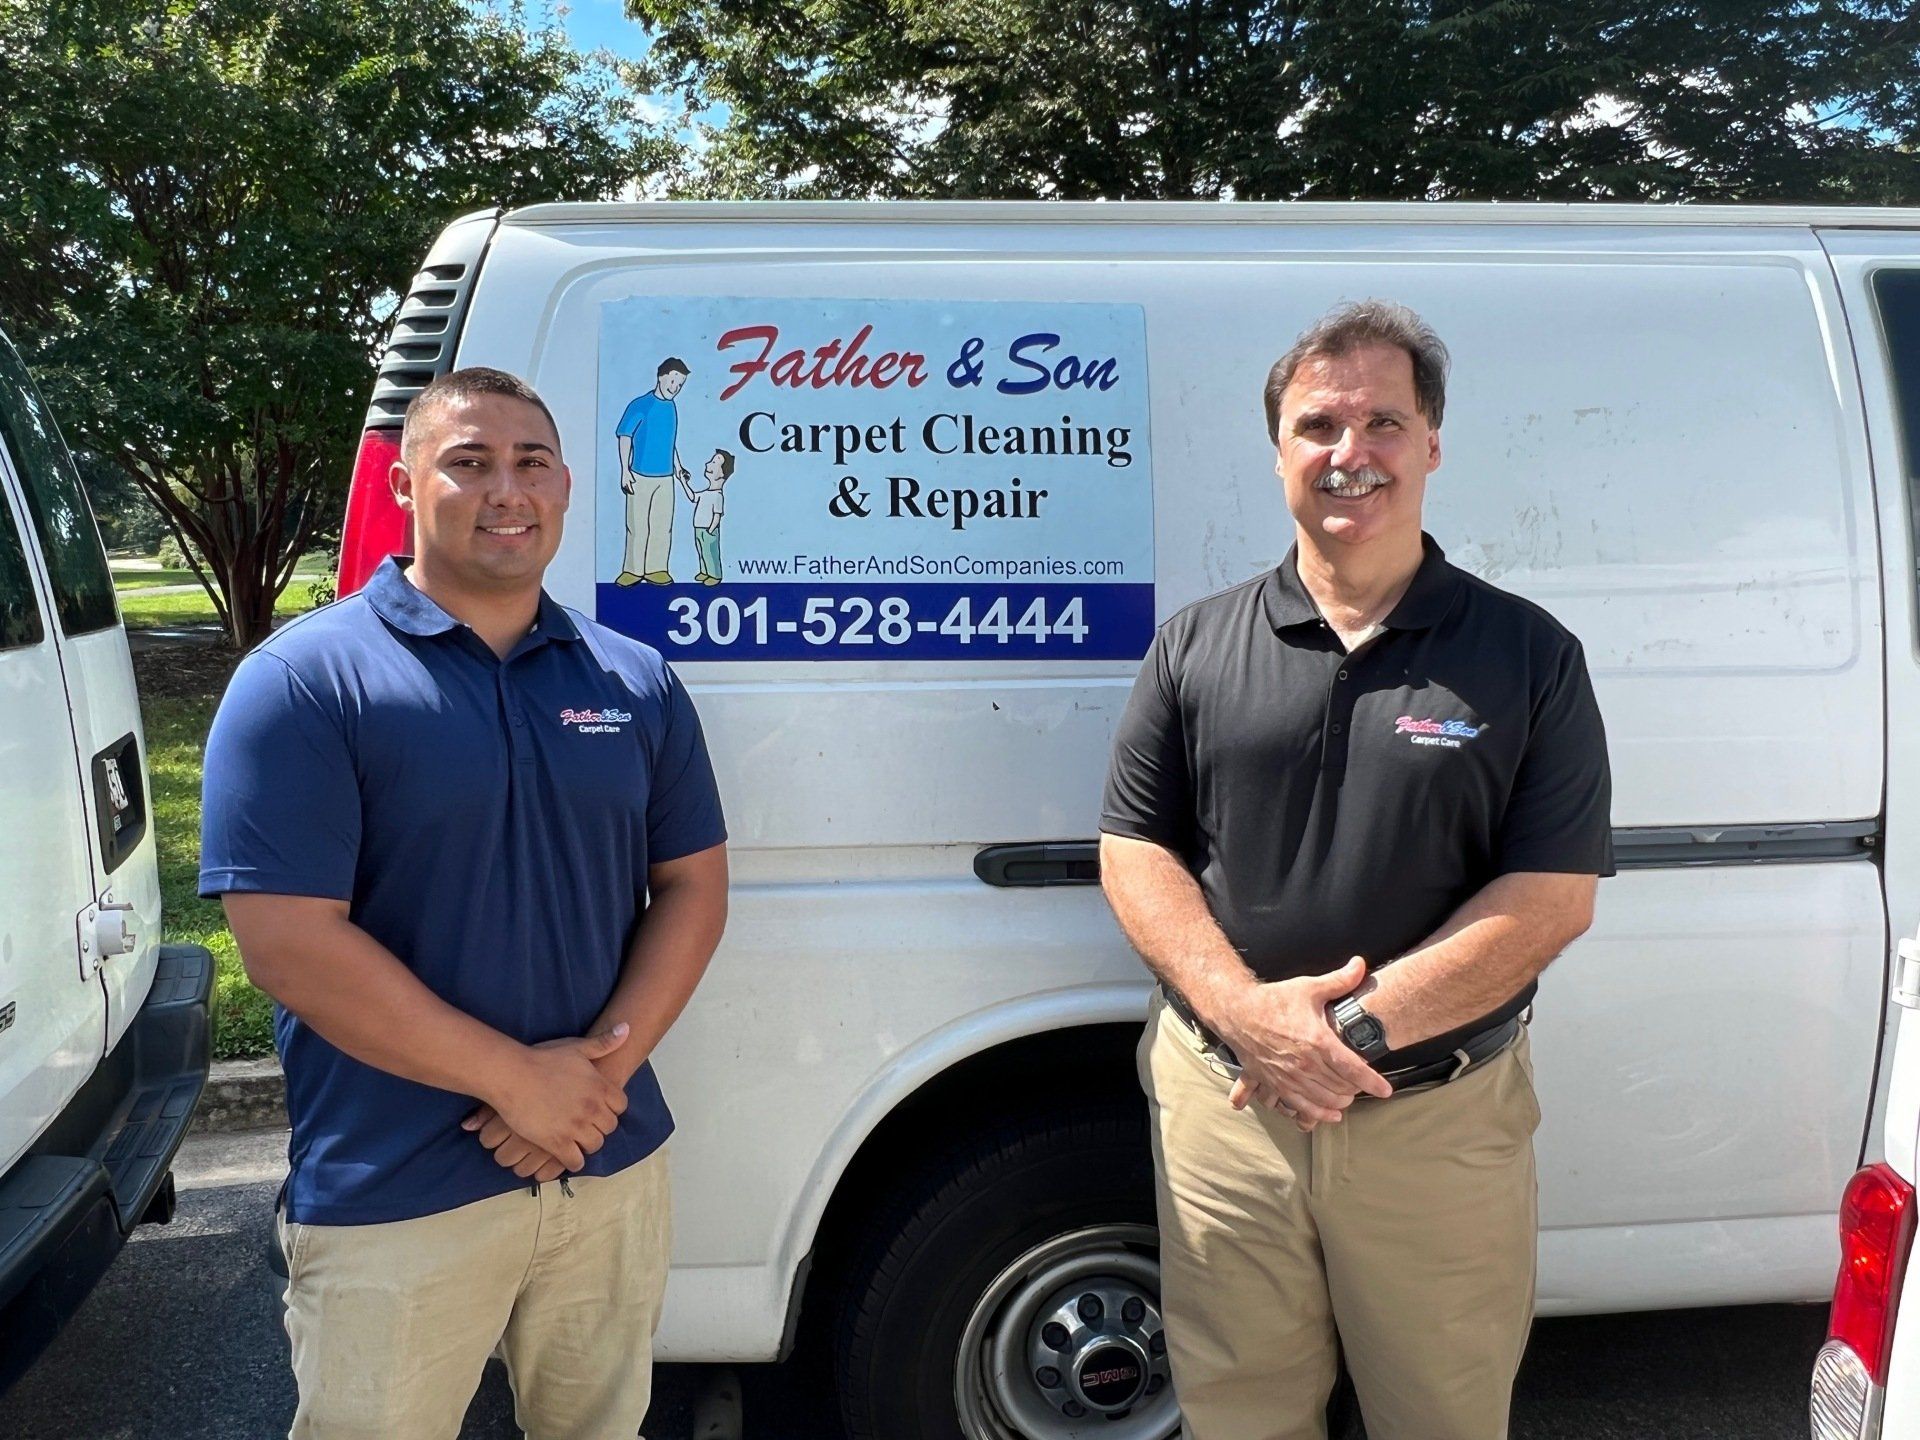 Richard & Raphael — Germantown, MD — Father & Son Carpet Cleaning & Repair